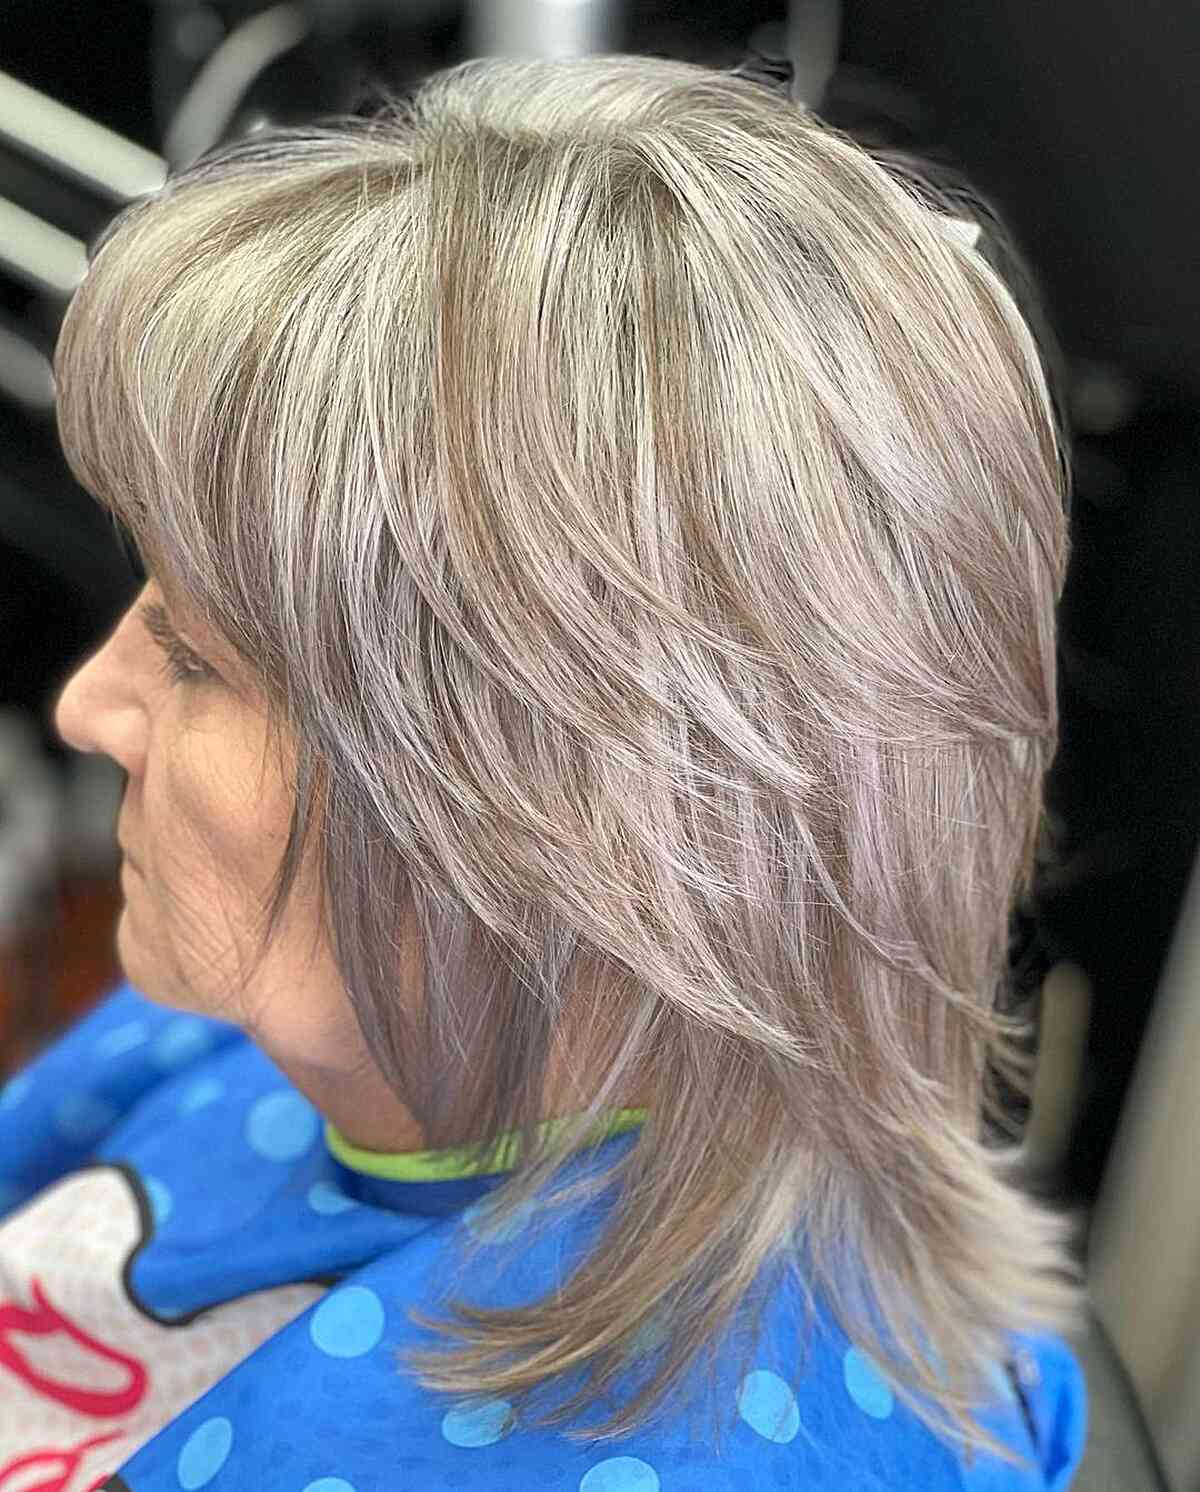 Multi-Layered Straight Haircut with Silver Highlights for Older Ladies Aged 60 with Medium Cut